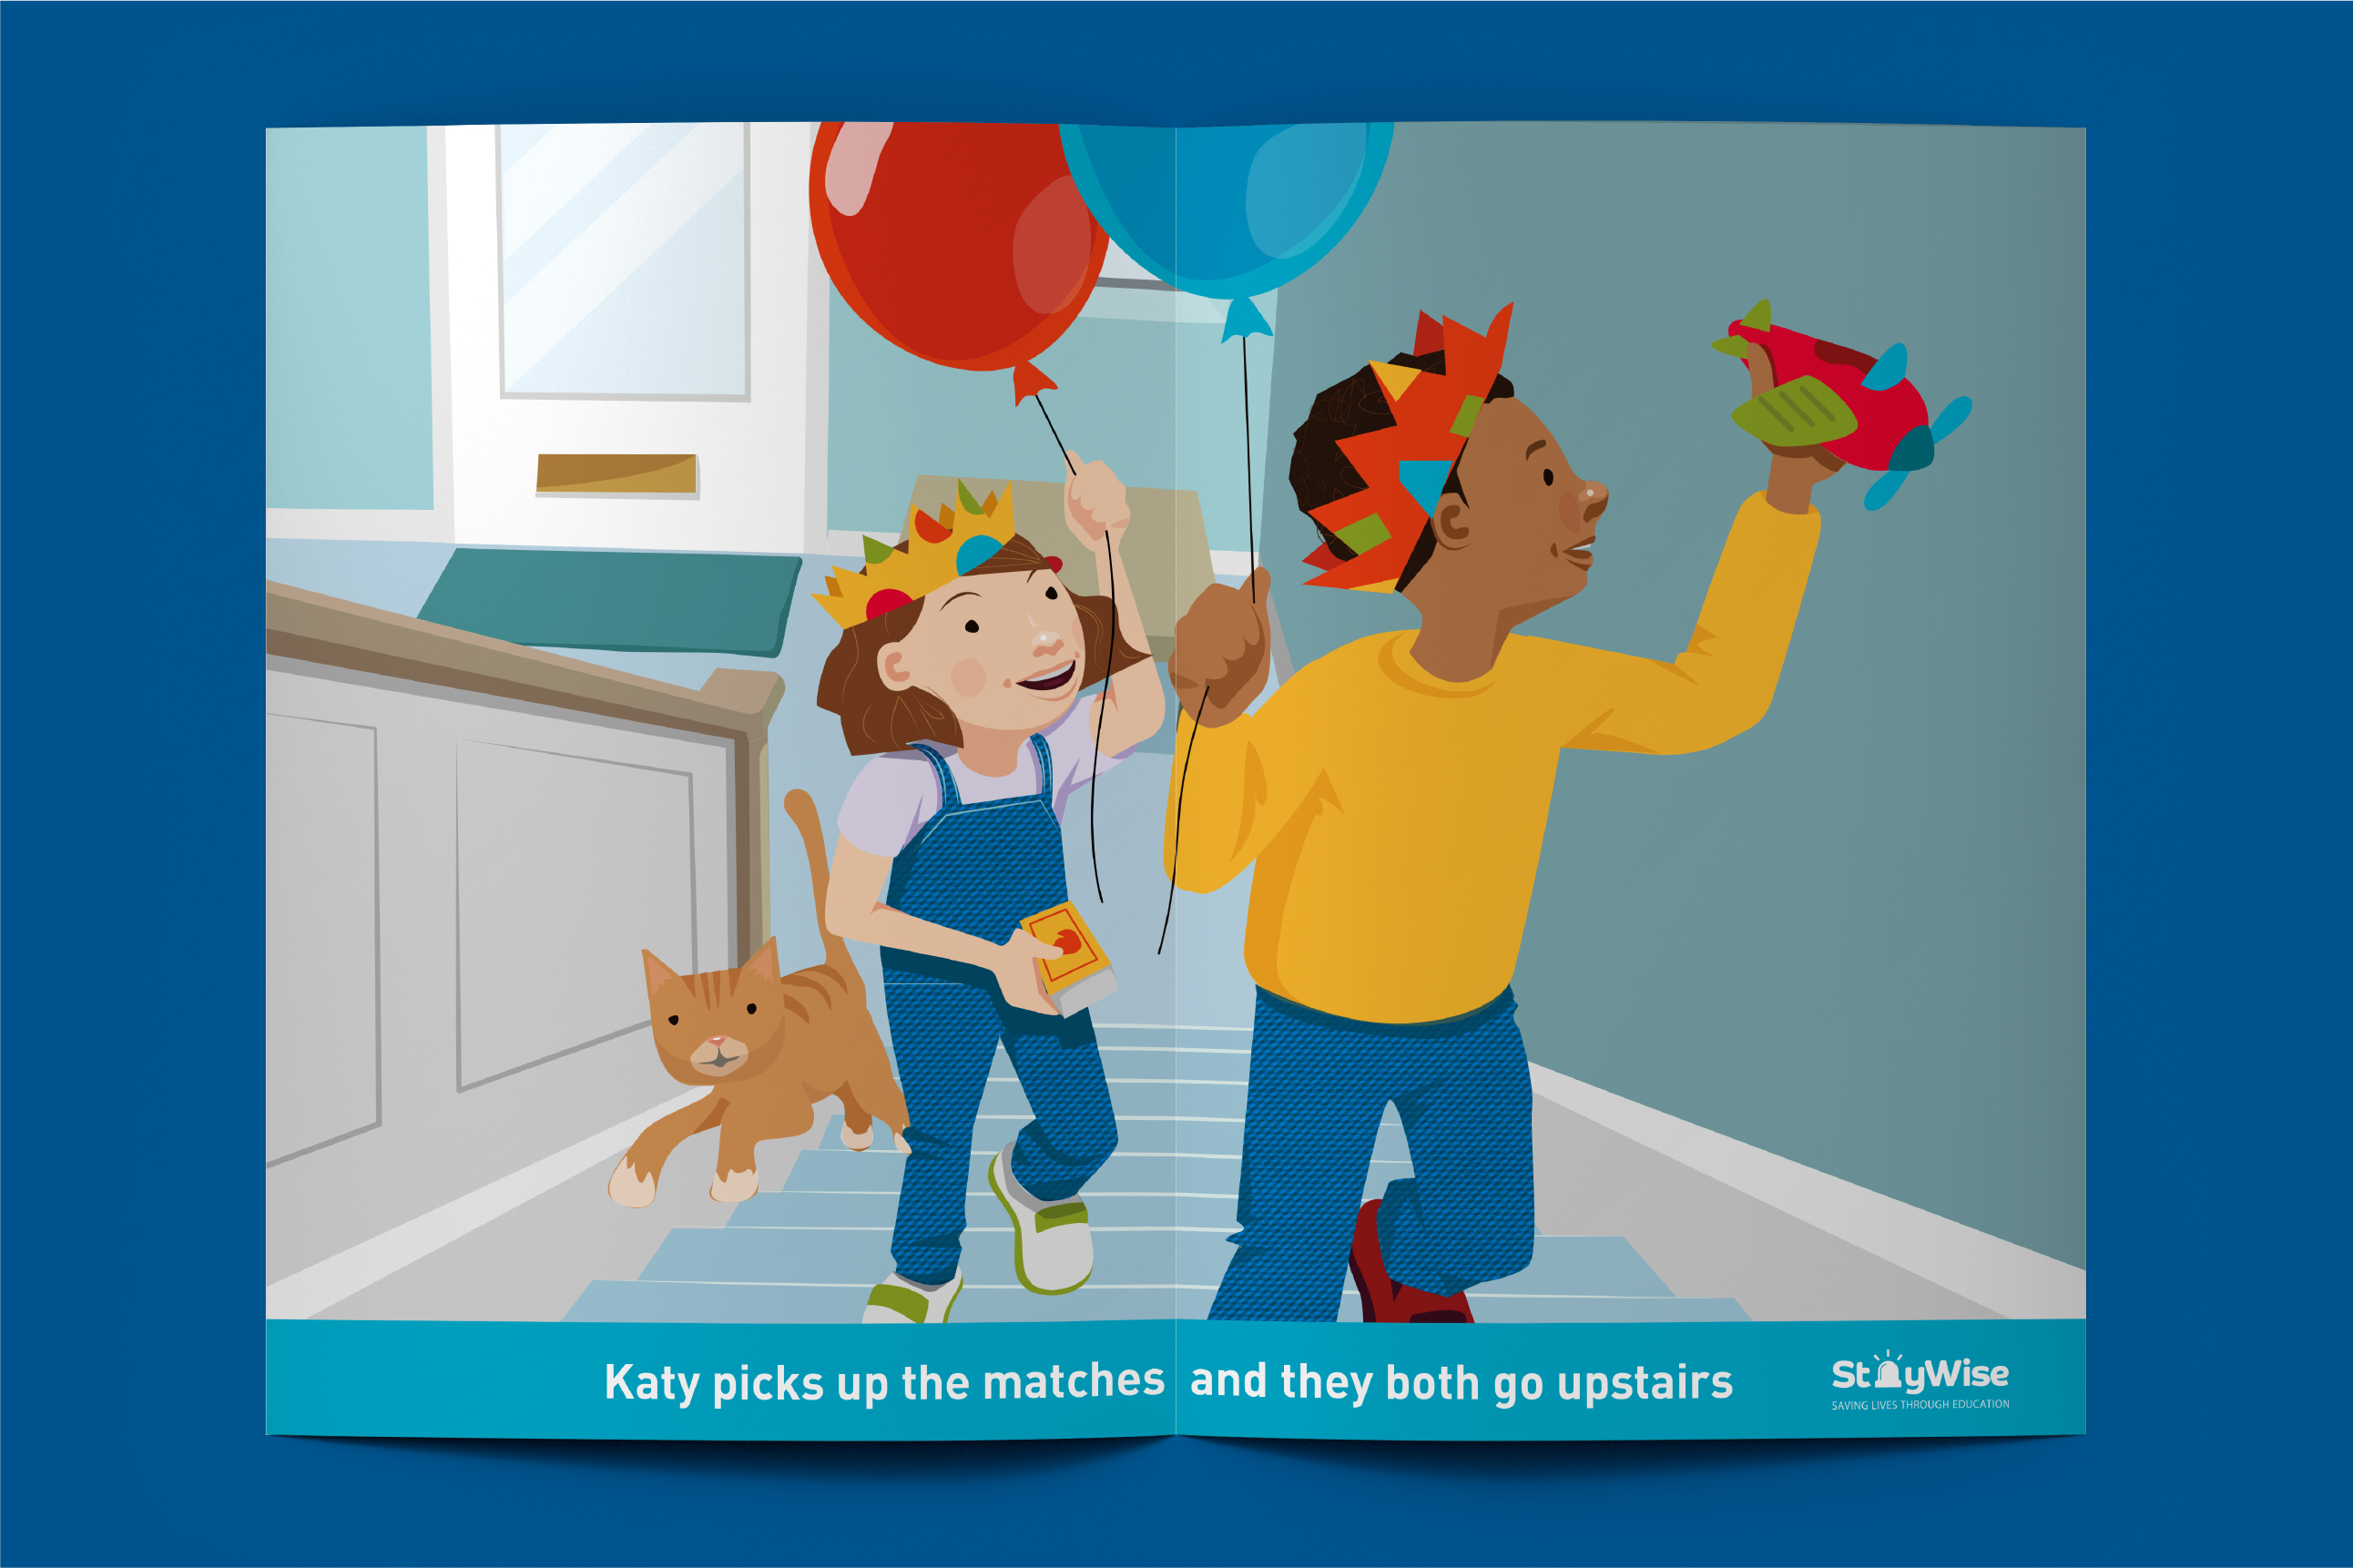 Spread from the illustrated book ‘The Birthday Cake Mistake!’ shows two smiling children, a girl and a boy, running and each holding a balloon. The boy is also holding a toy plane while the girl is holding a box of matches. Text beneath the illustration: Katy picks up matches and they both go upstairs . ‘Staywise - saving lives through education’ logo.